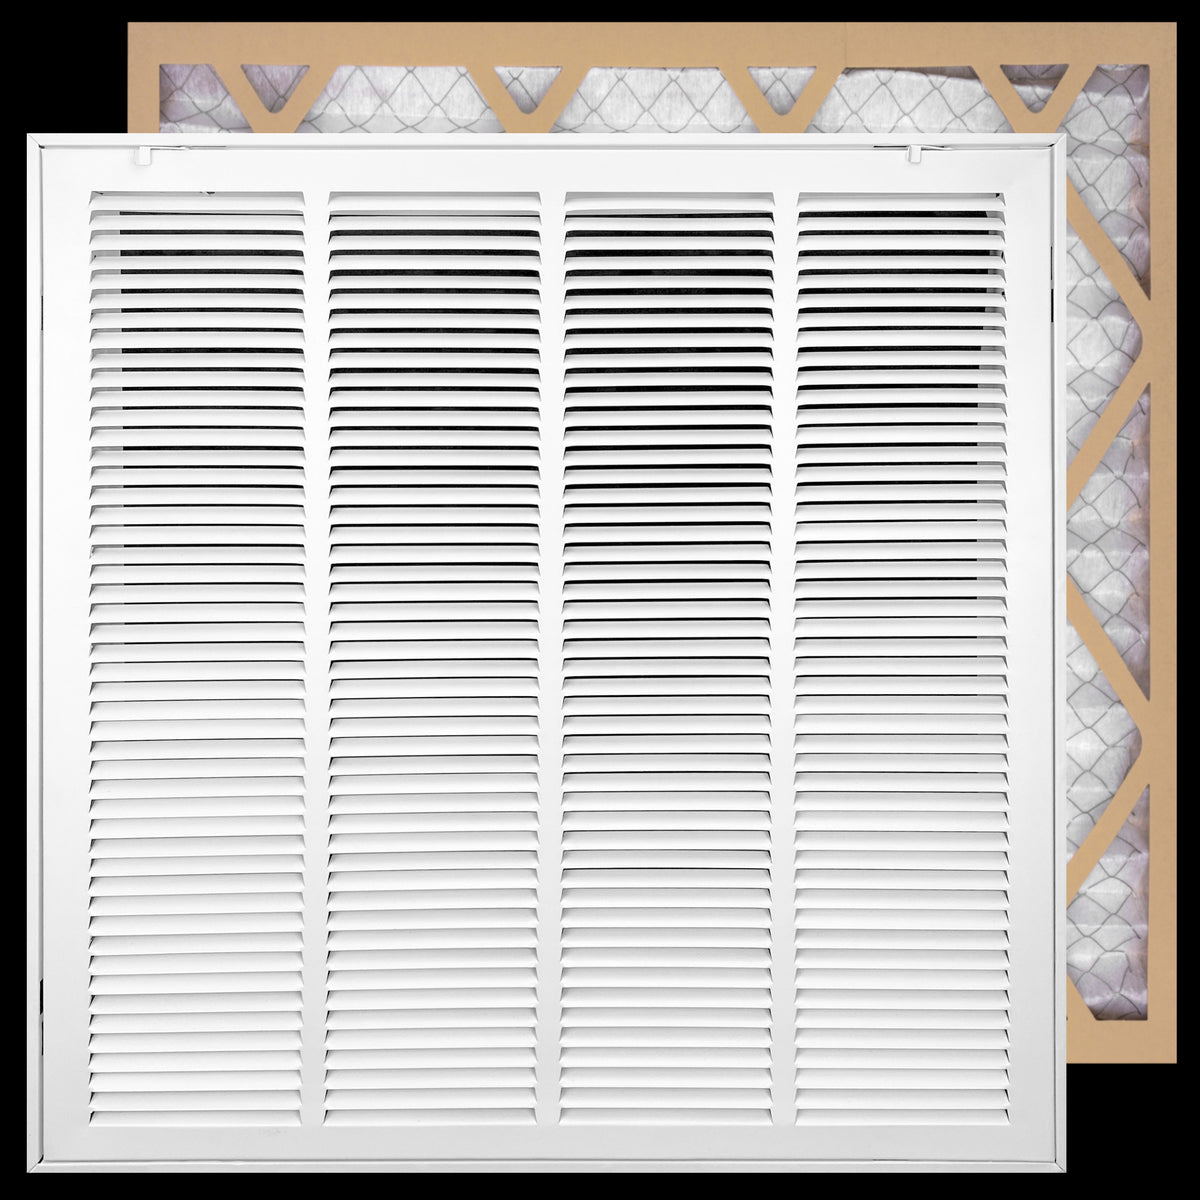 airgrilles 20" x 20" duct opening   filter included hd steel return air filter grille for sidewall and ceiling fil-7rafg1-wh-20x20 038775643900 - 1